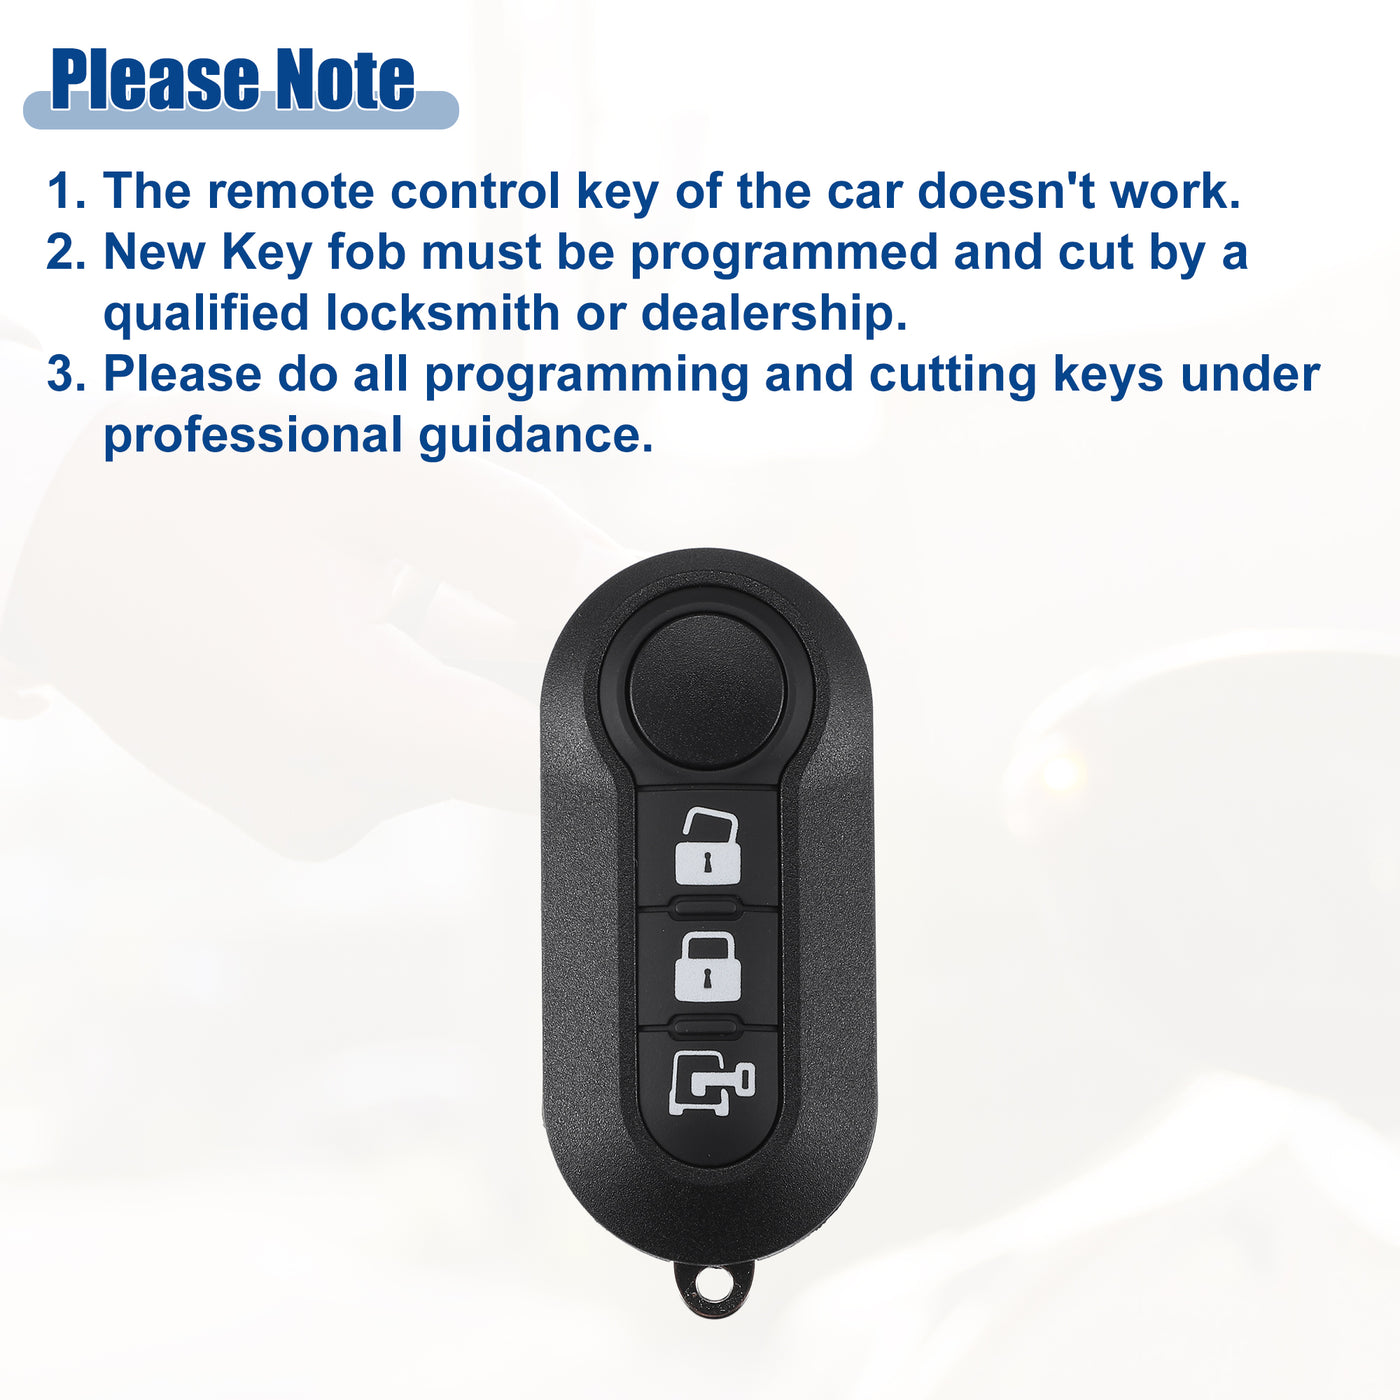 ACROPIX 433 MHz Key Fob Keyless Entry Remote Fit for Ram ProMaster 1500 2500 3500 for Fiat RX2TRF198 - Pack of 1 Black